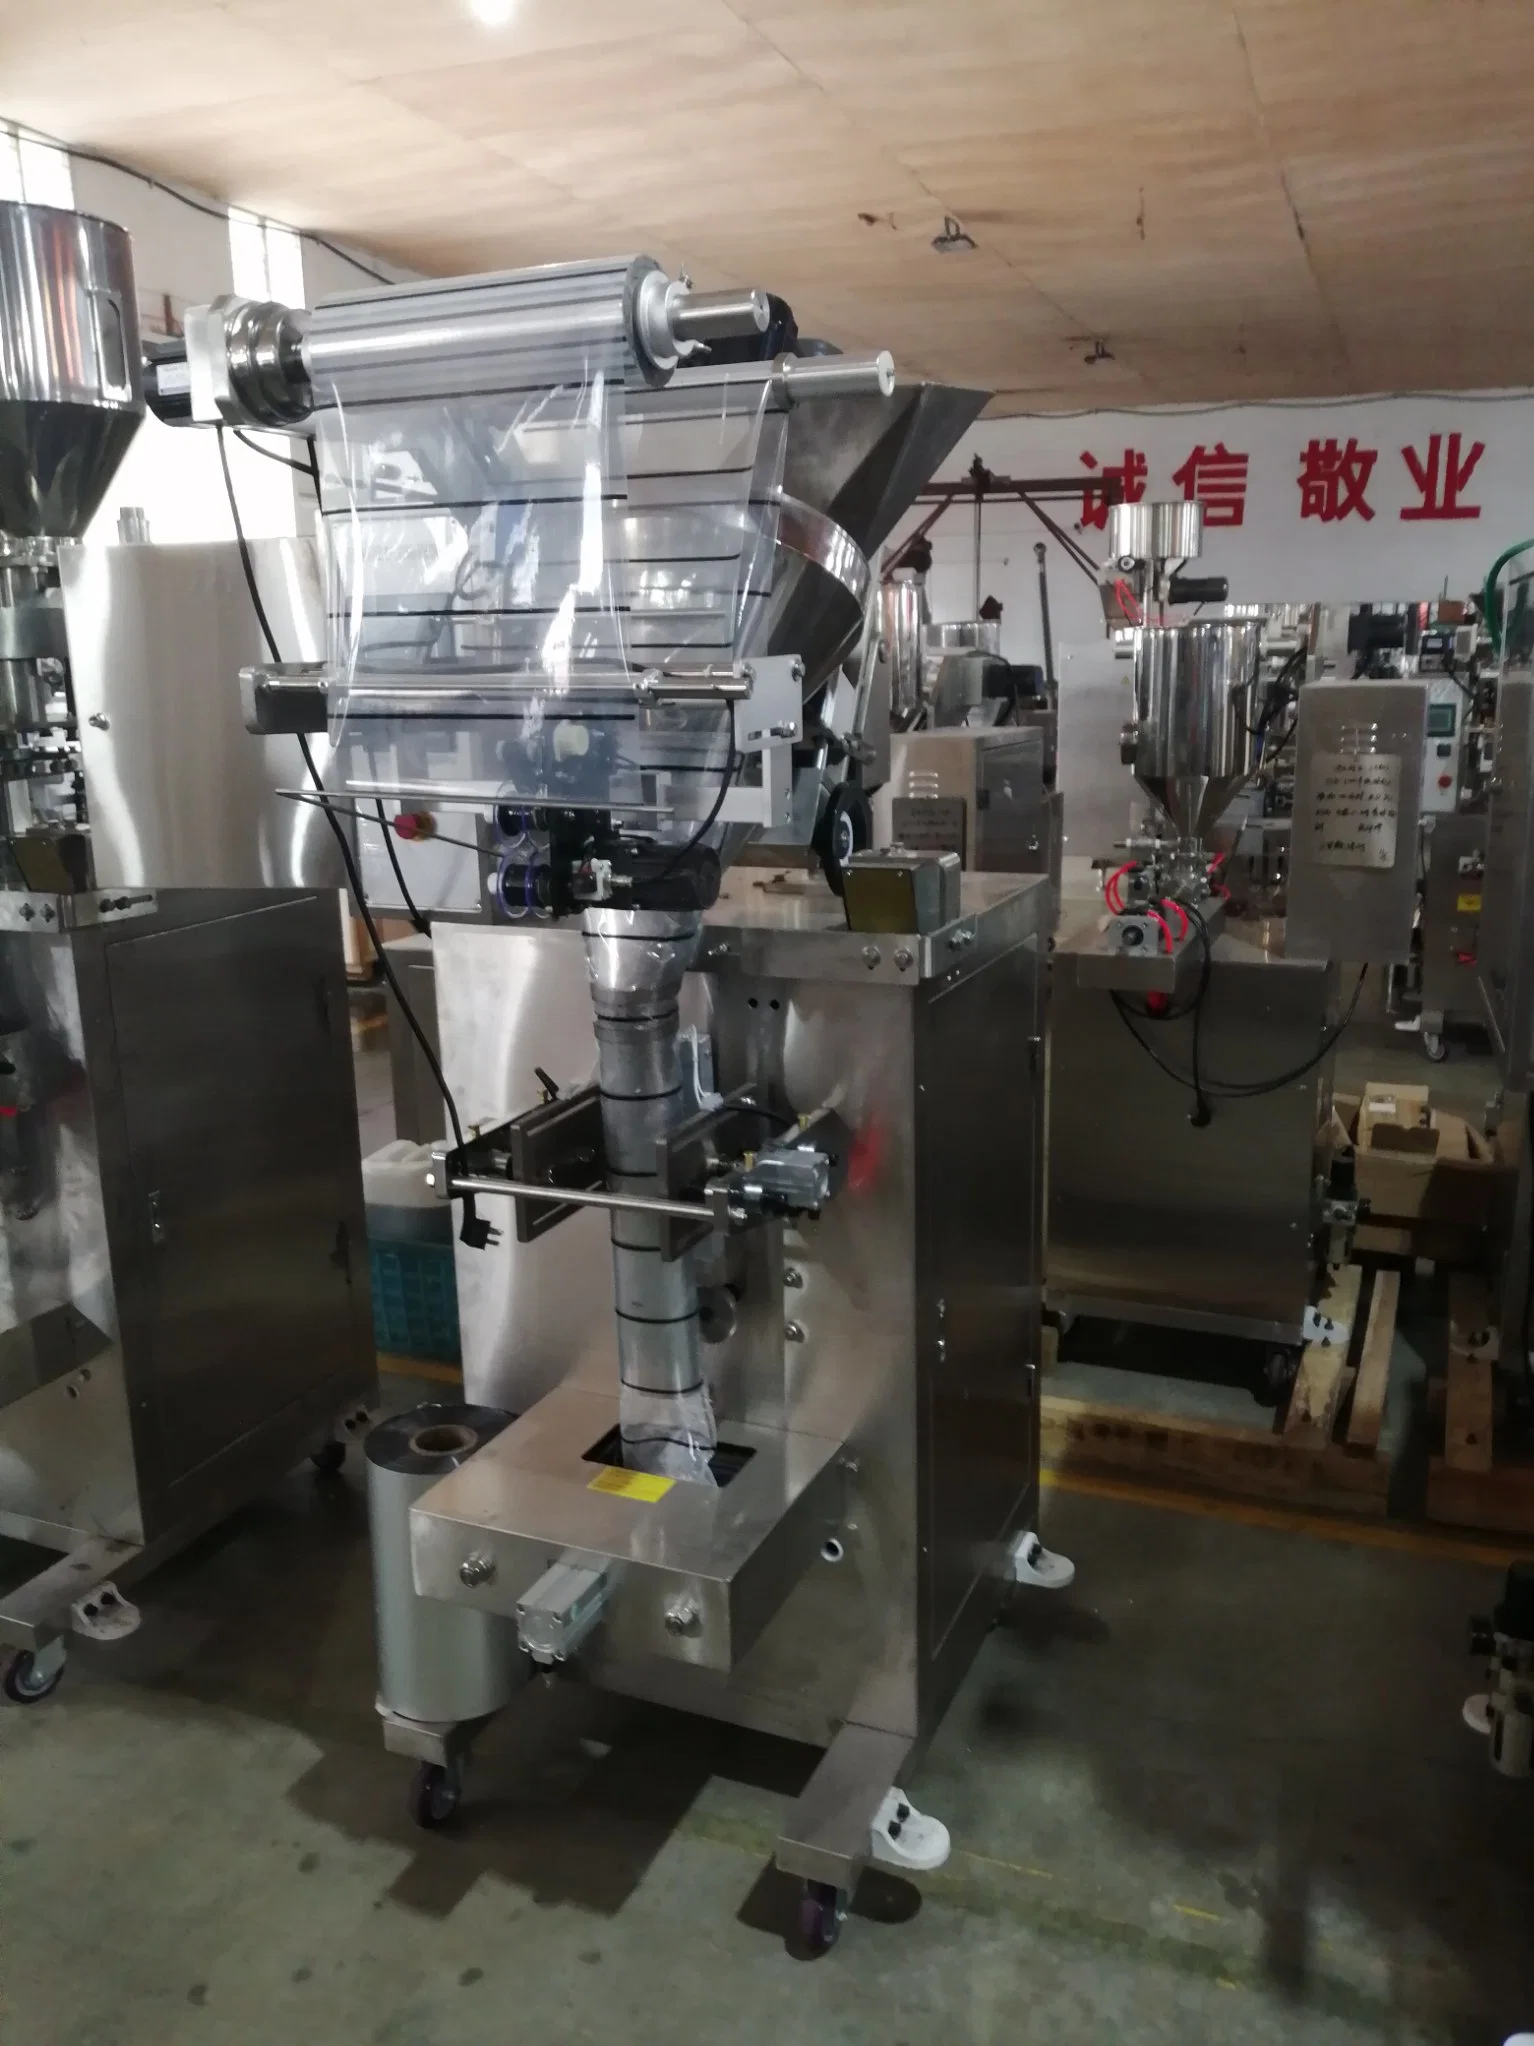 Full Automatic Stainless Steel Cocoa Coffee Powder Packing Machine Production Line Equipment